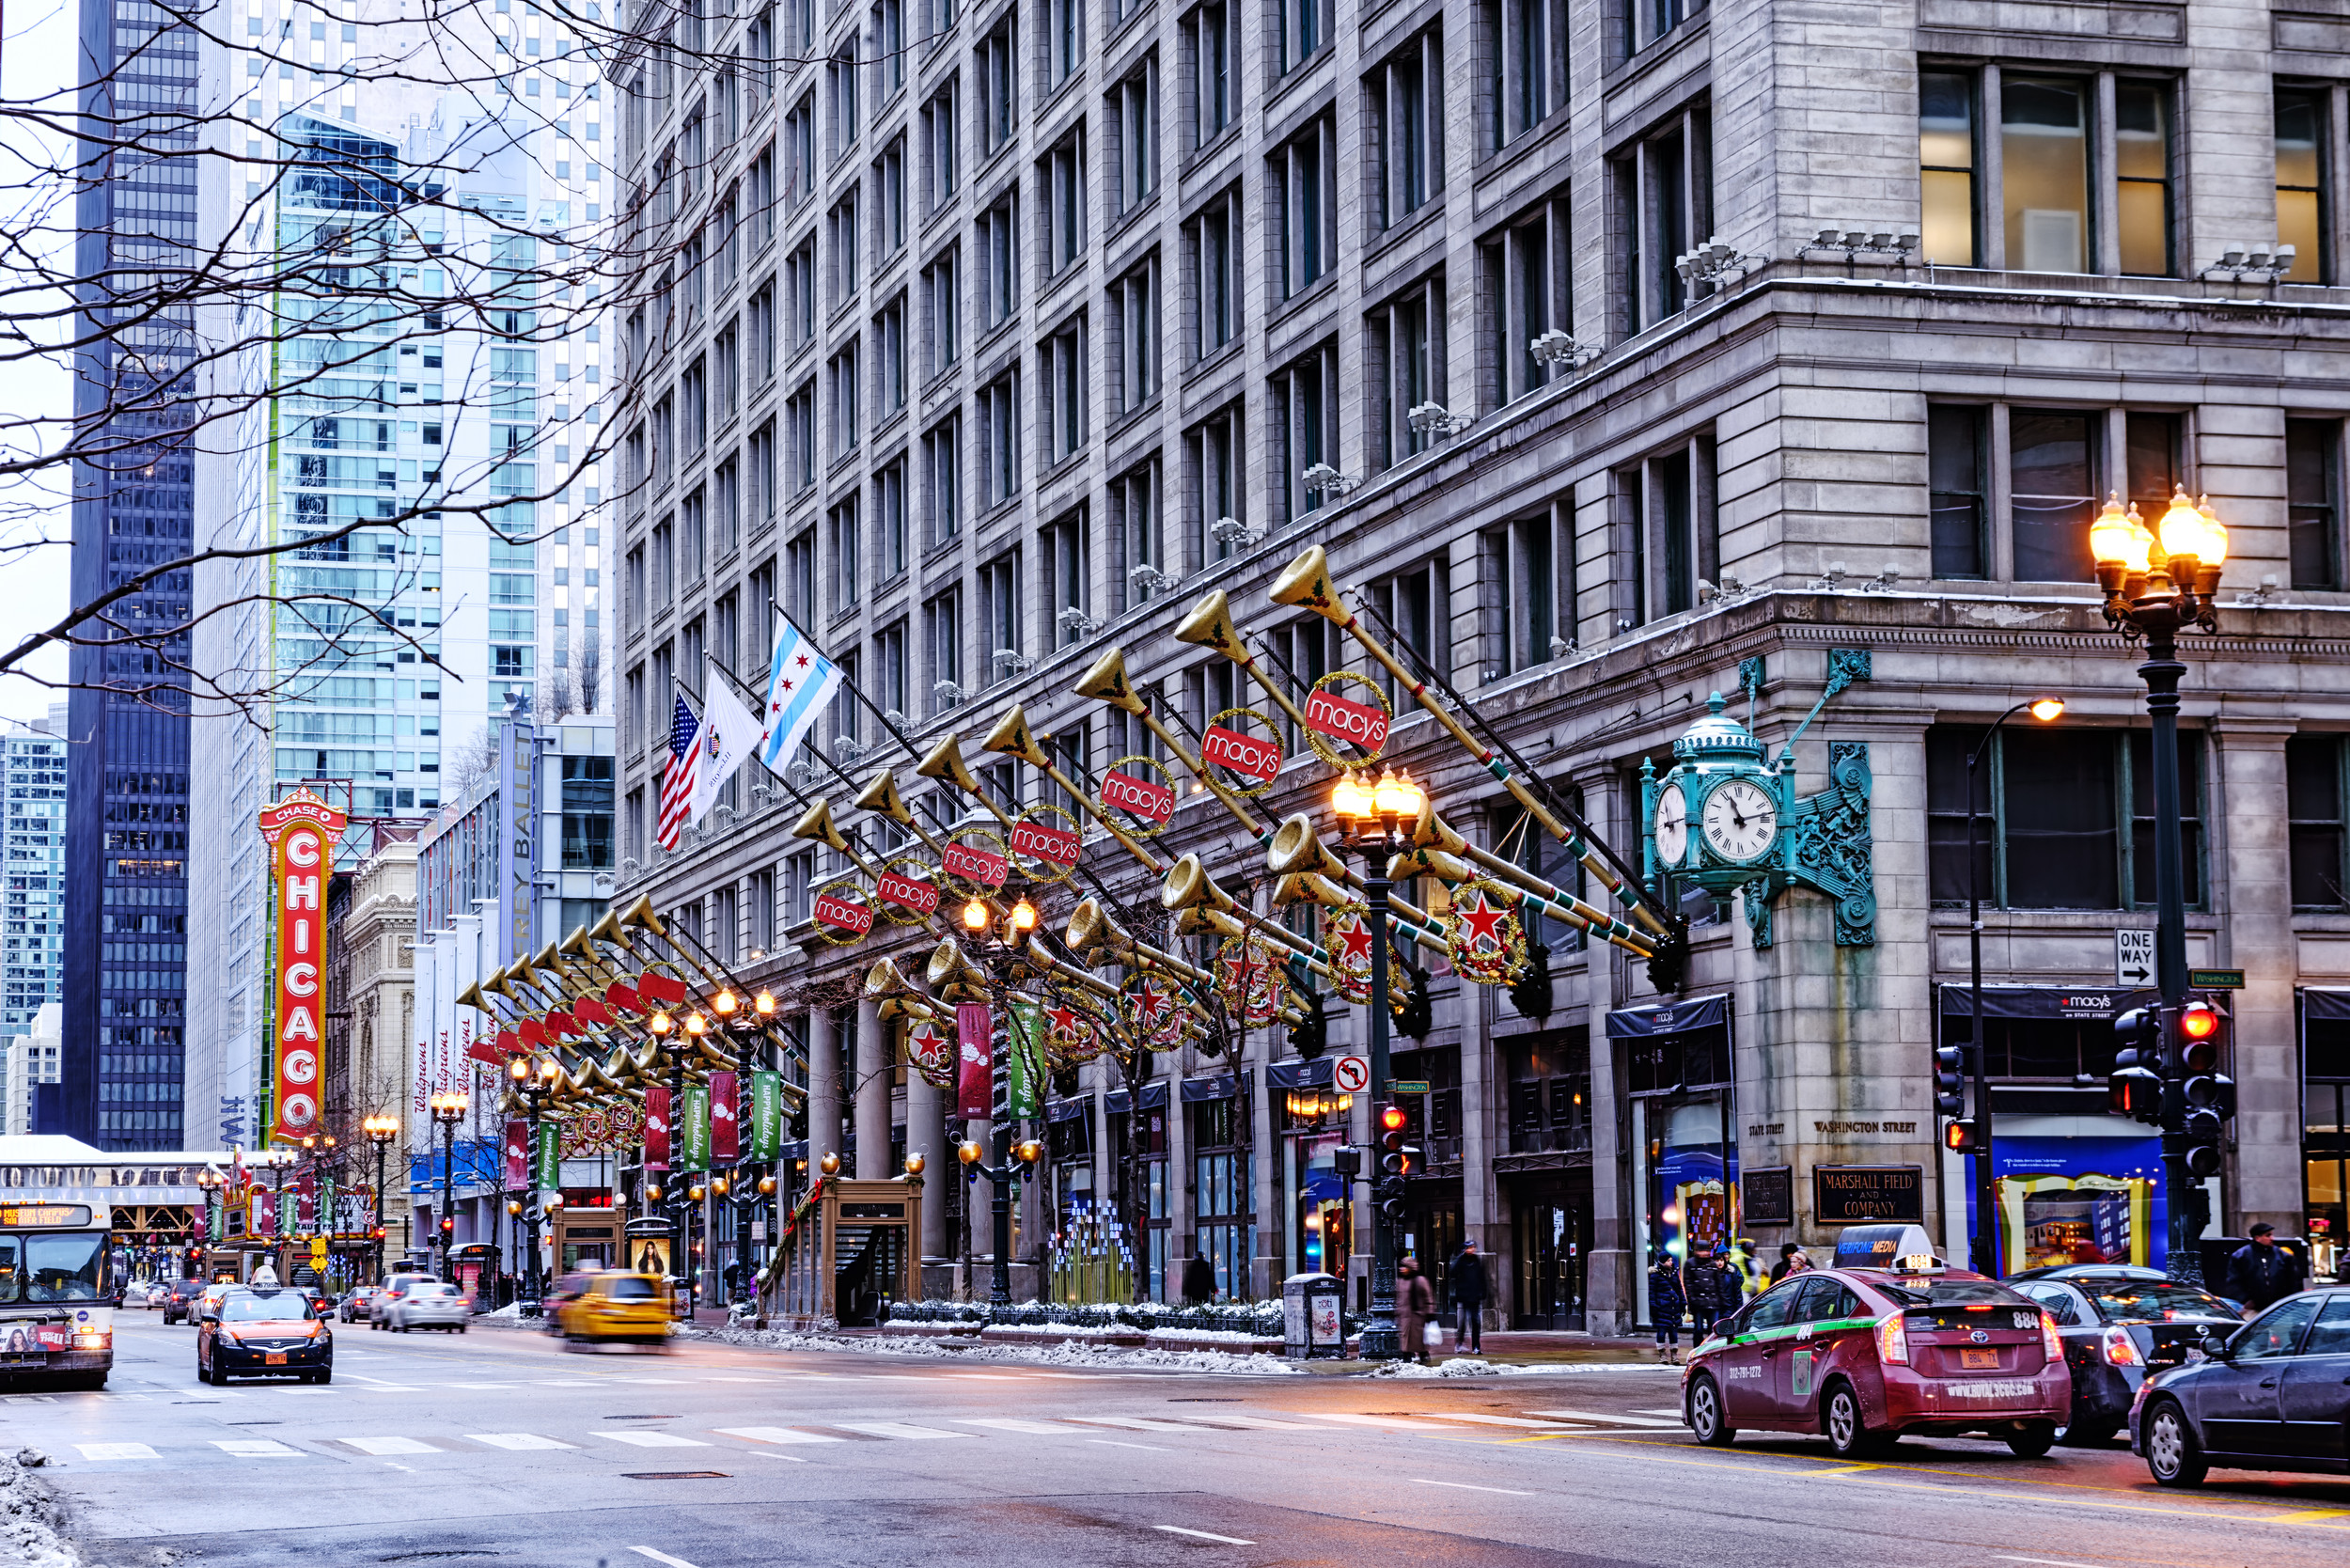 Spending the holiday season in Chicago? Here’s what to do Wintrust